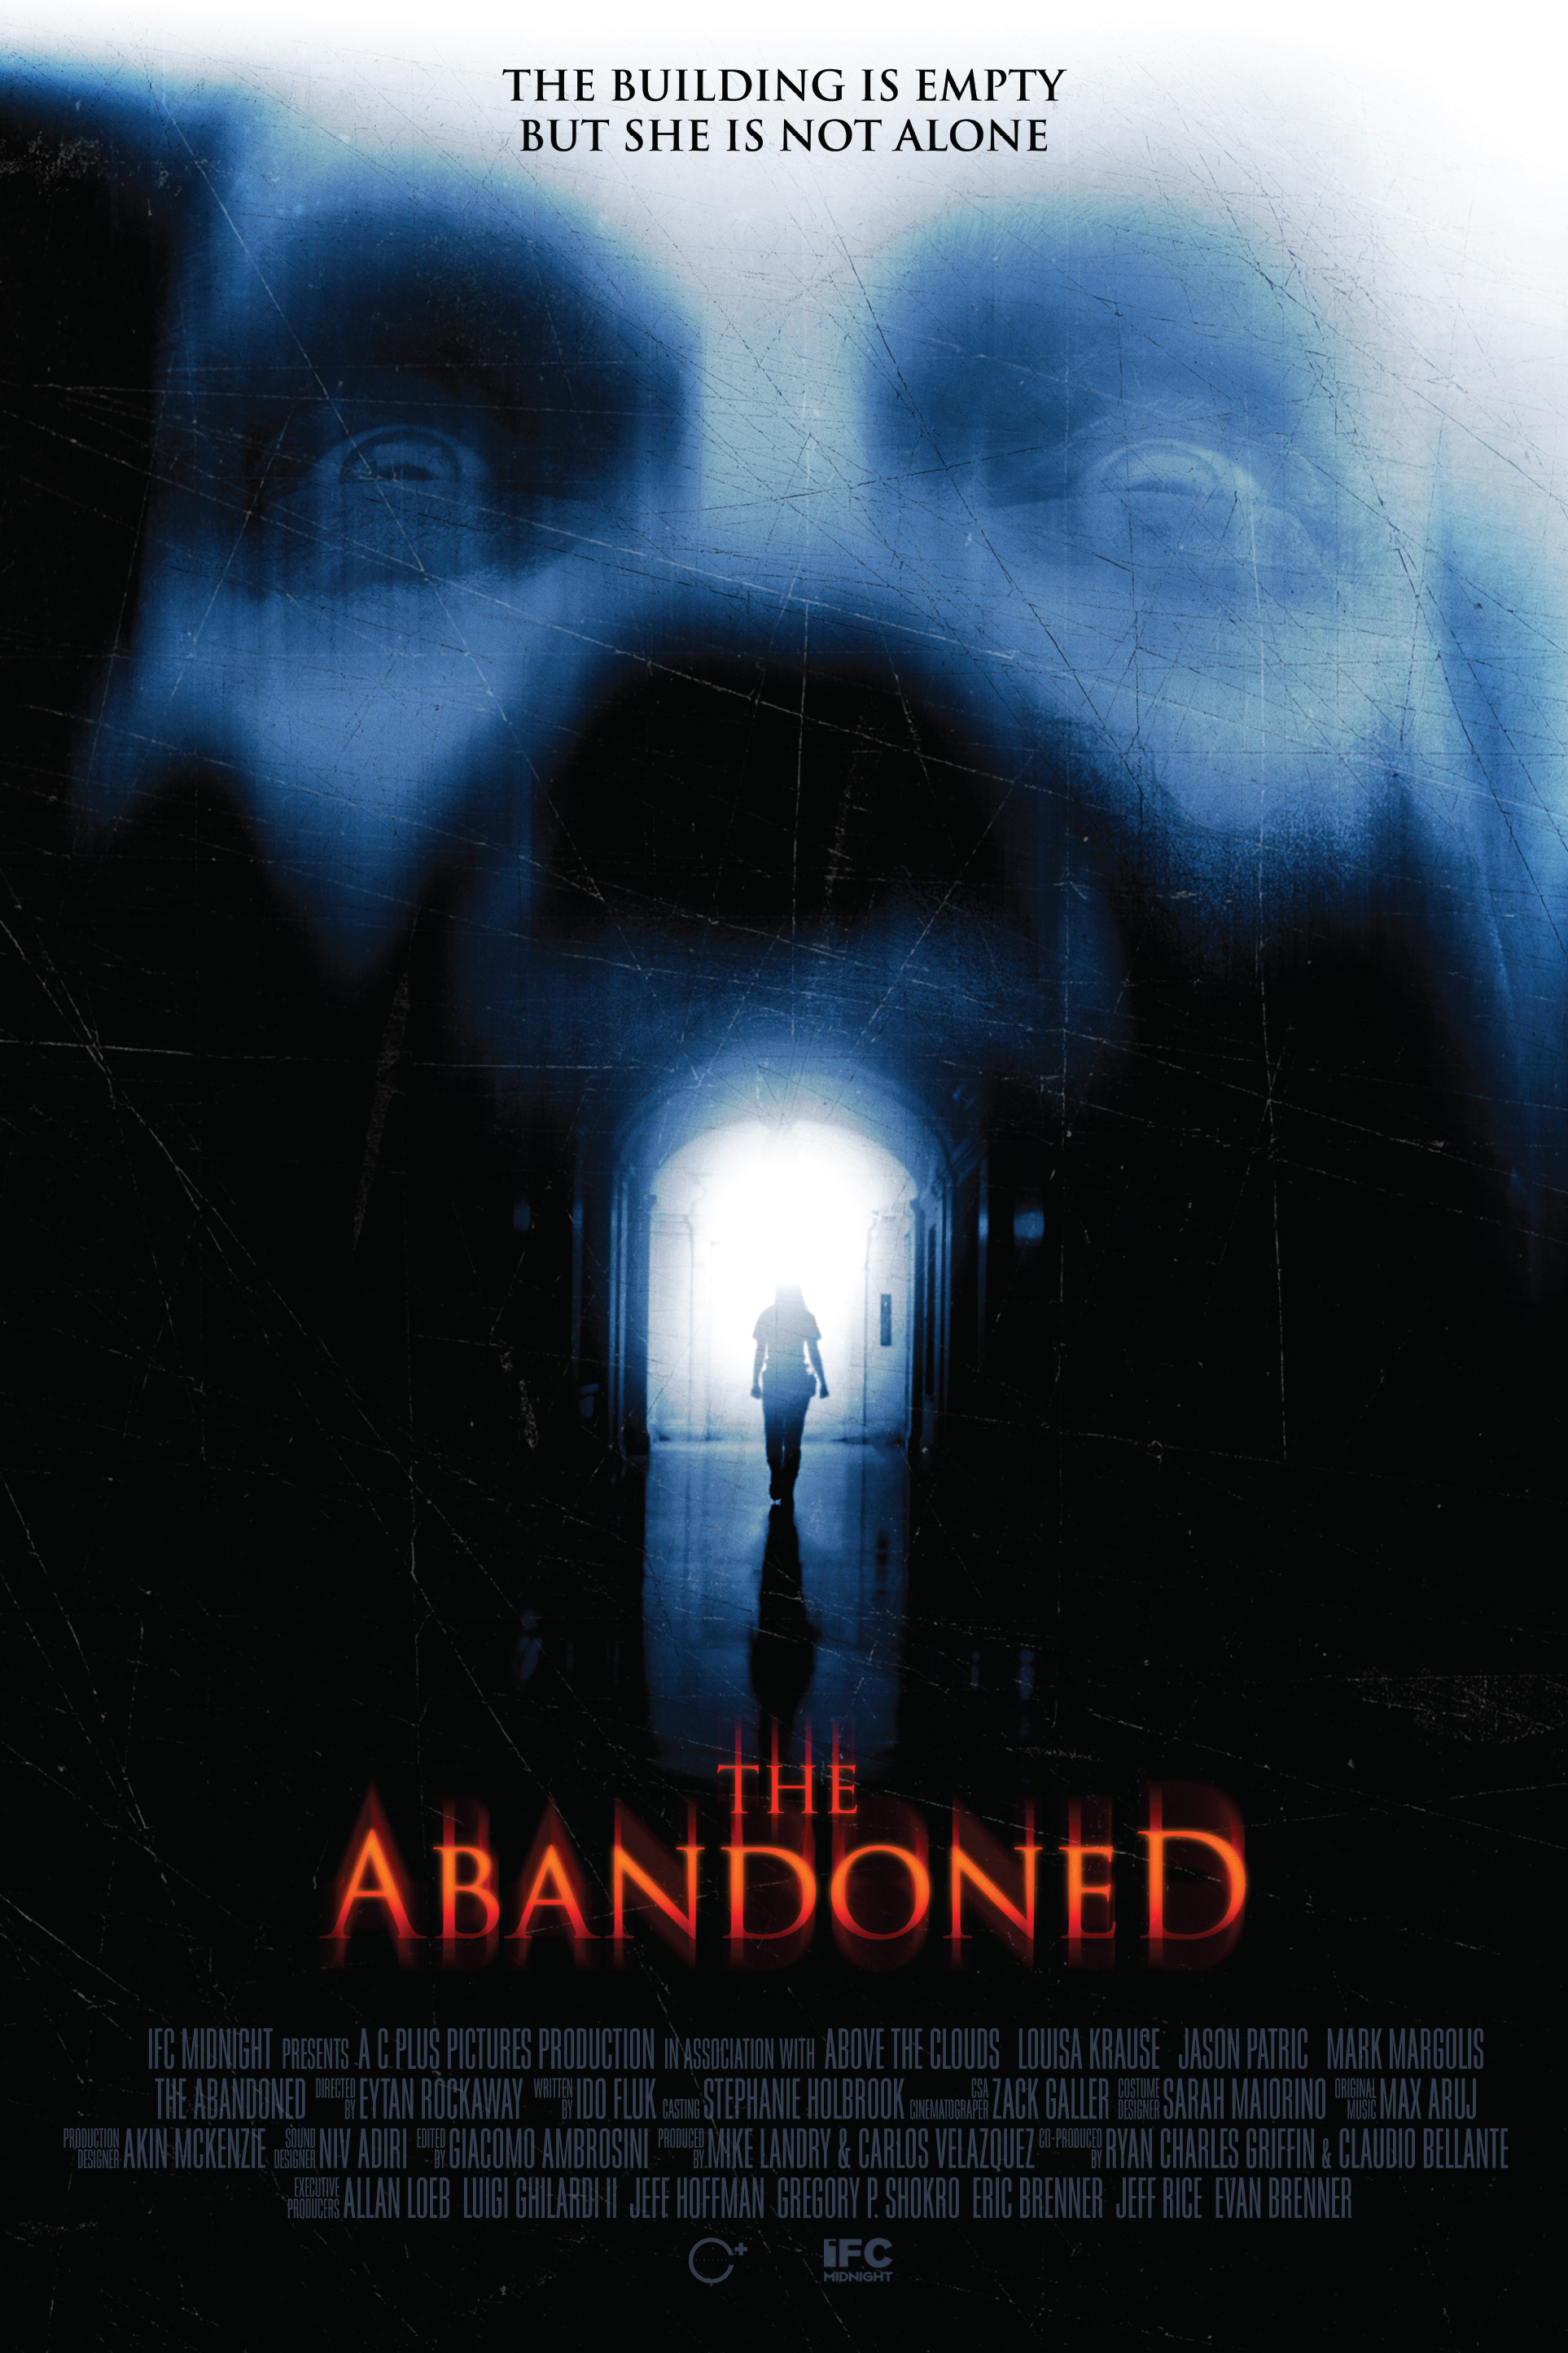 The Abandoned Horror Aliens Zombies Vampires Creature Features And More From Ifc Midnight